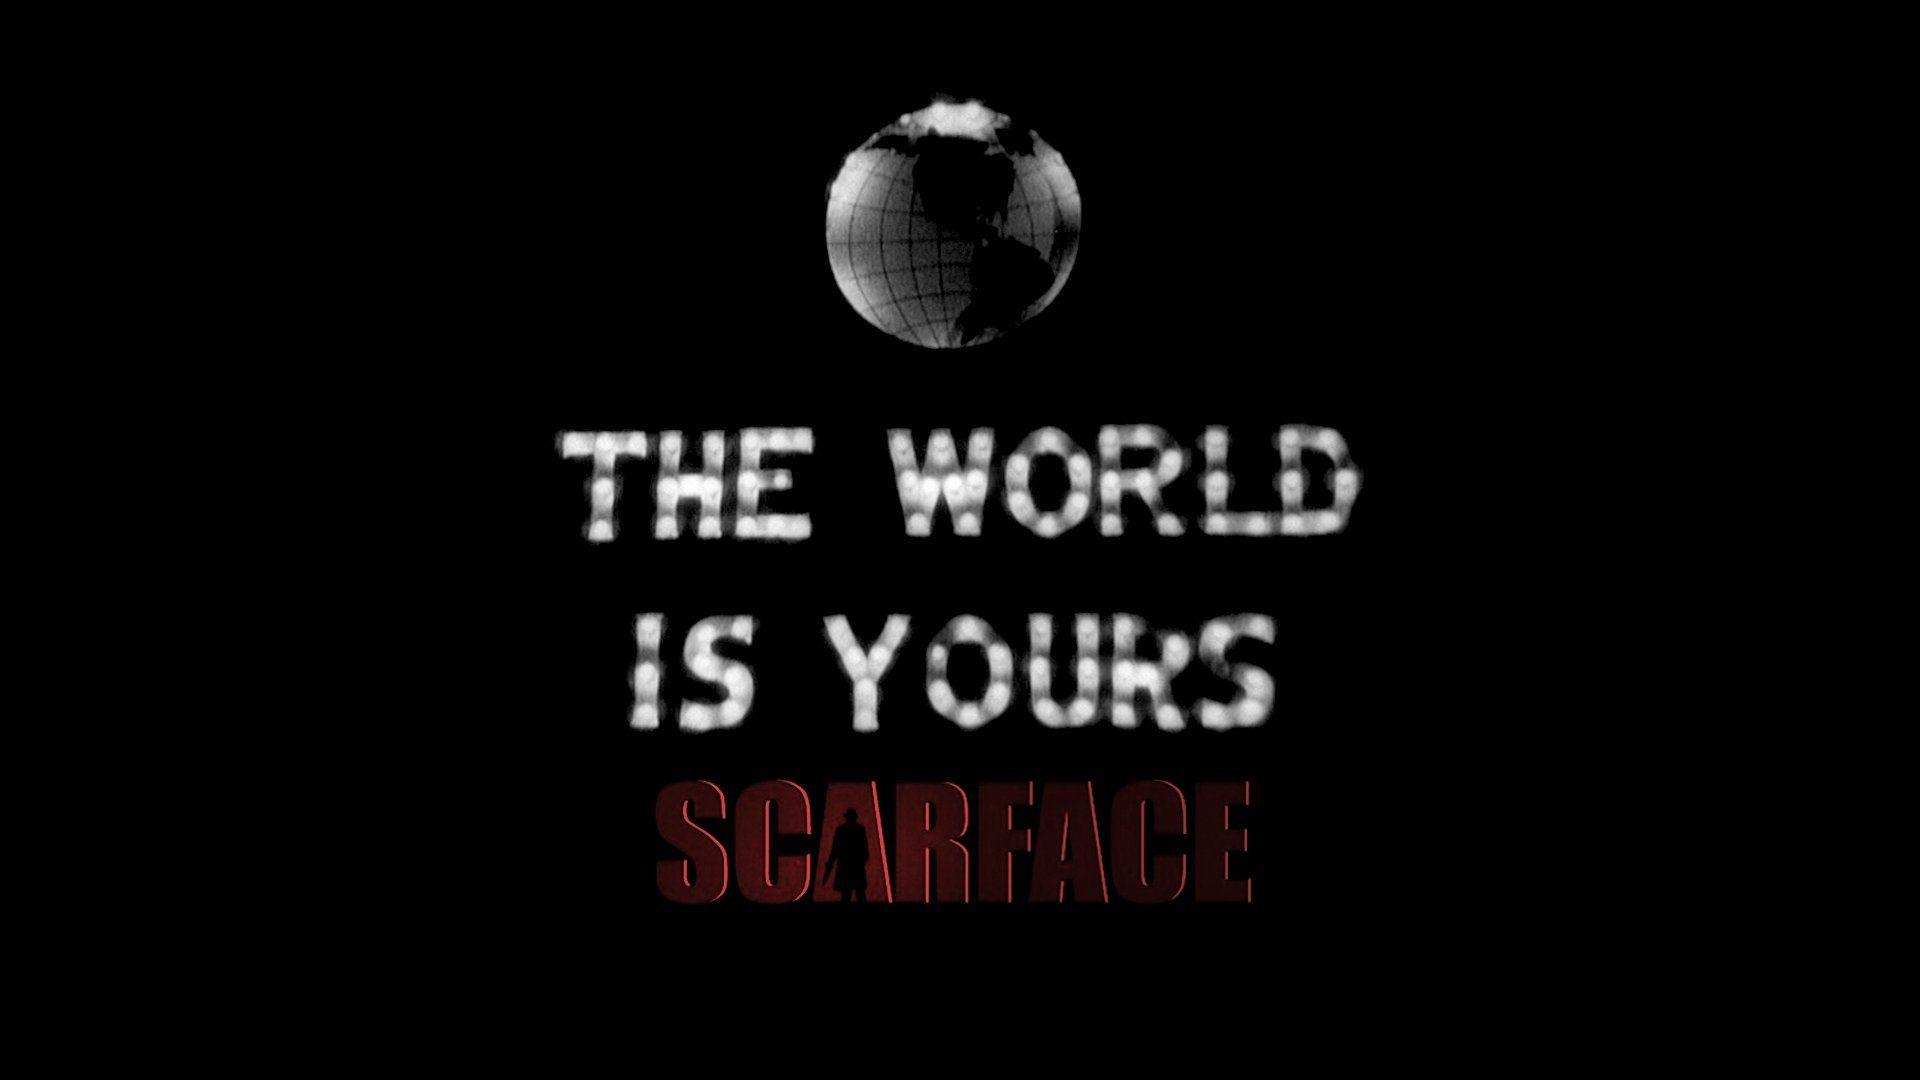 DA58: Scarface The World Is Yours Wallpaper, Scarface The World Is